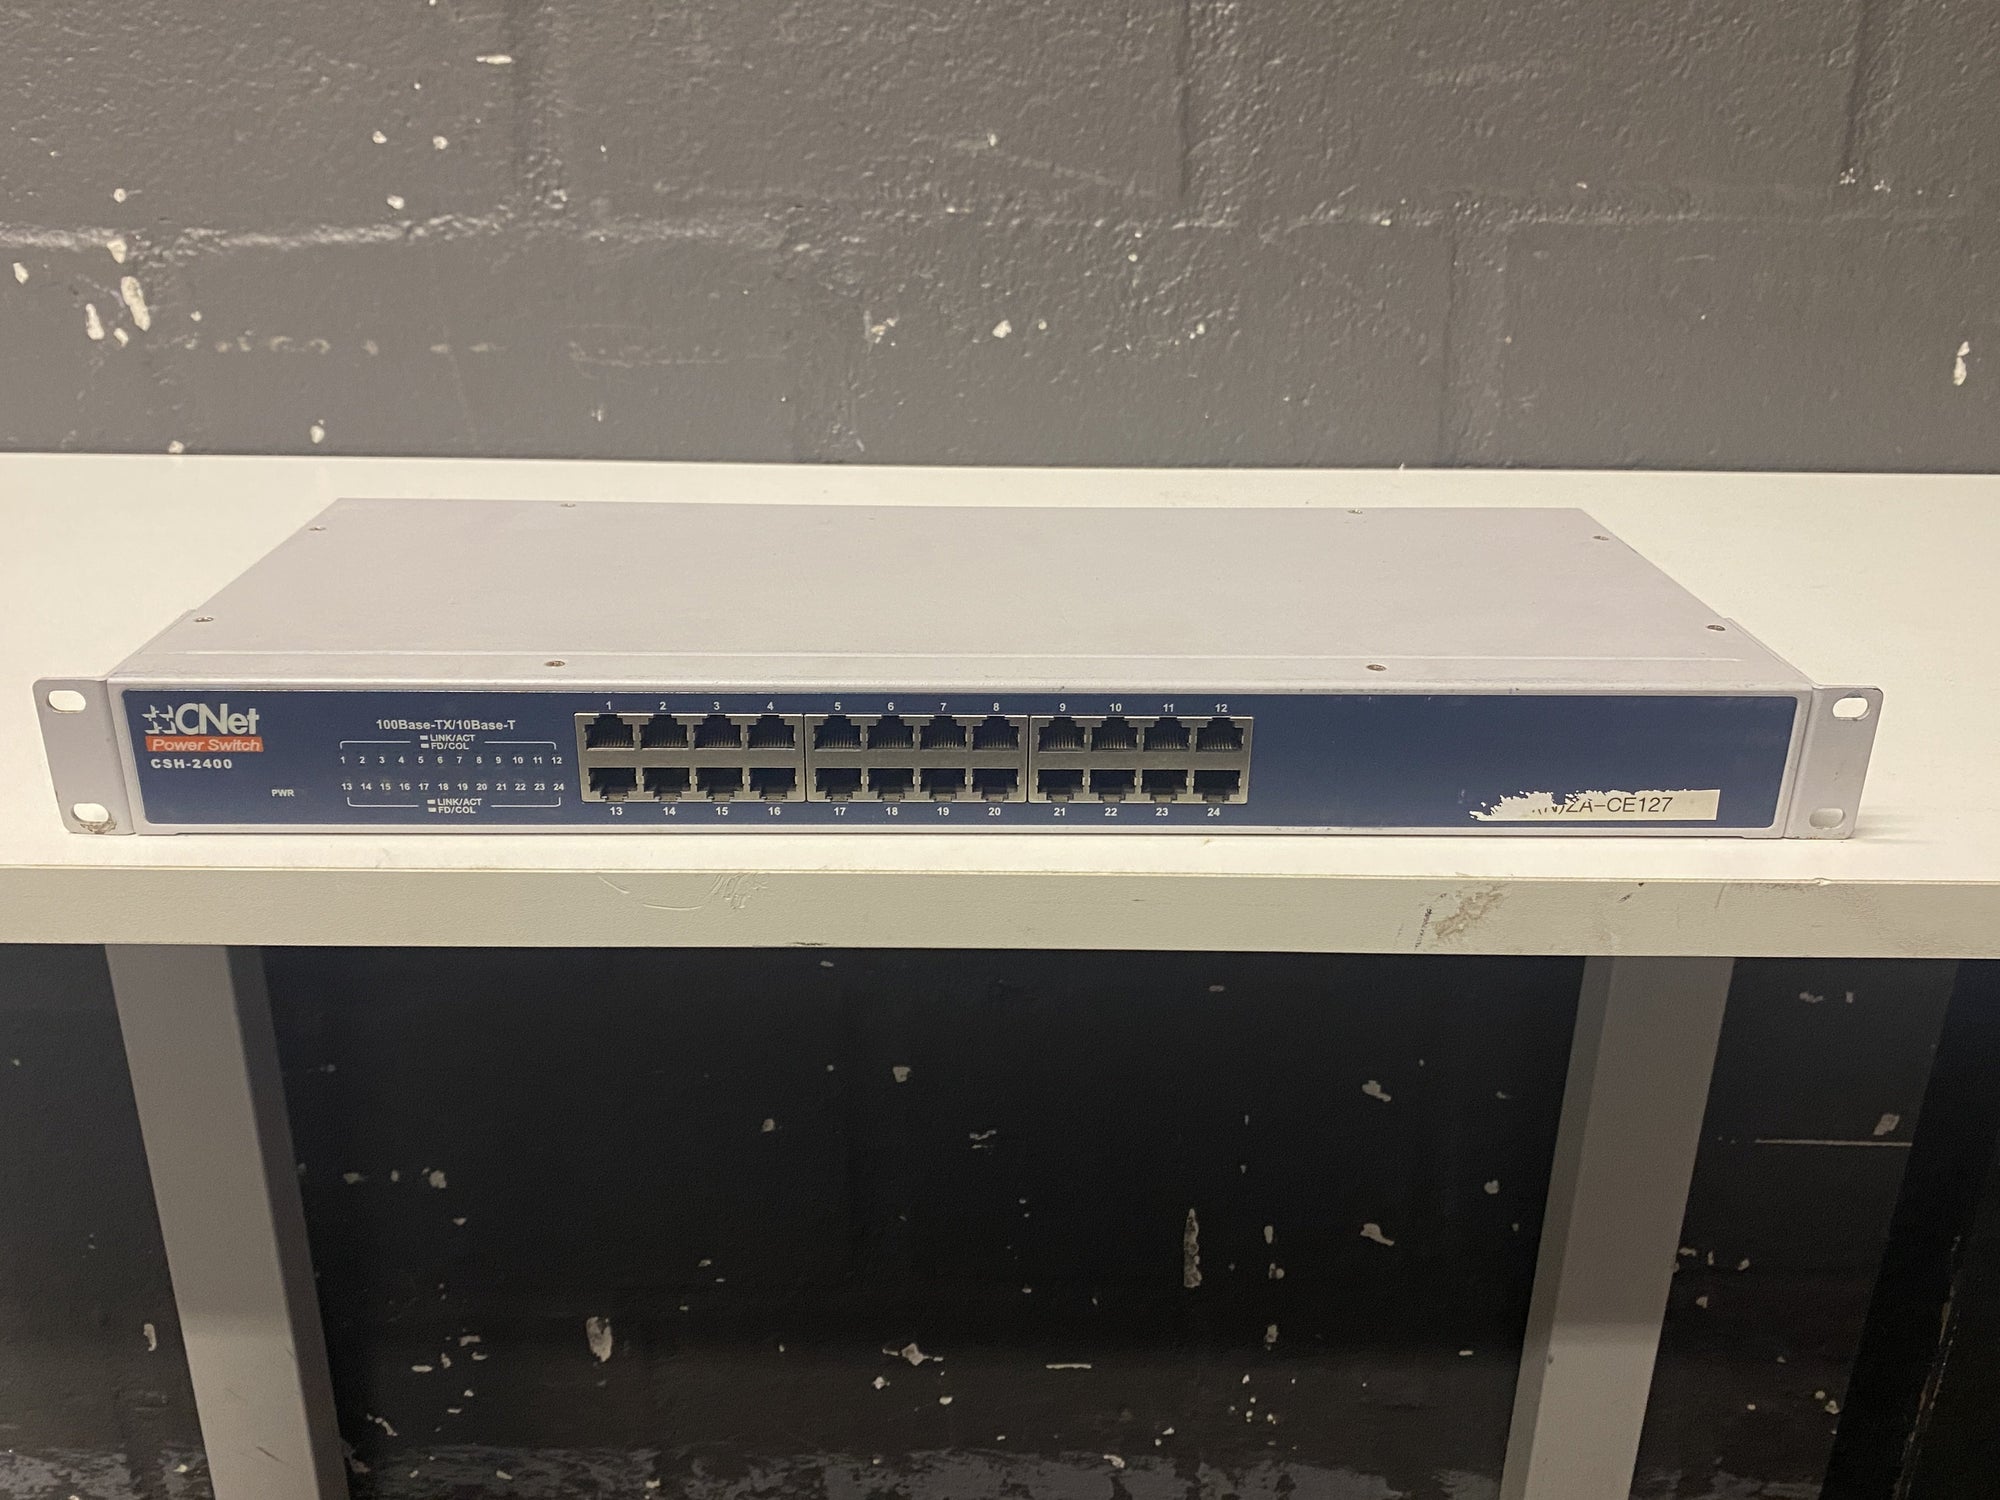 CNET CSH-2400 24-port 10/100Mbps Power Switch